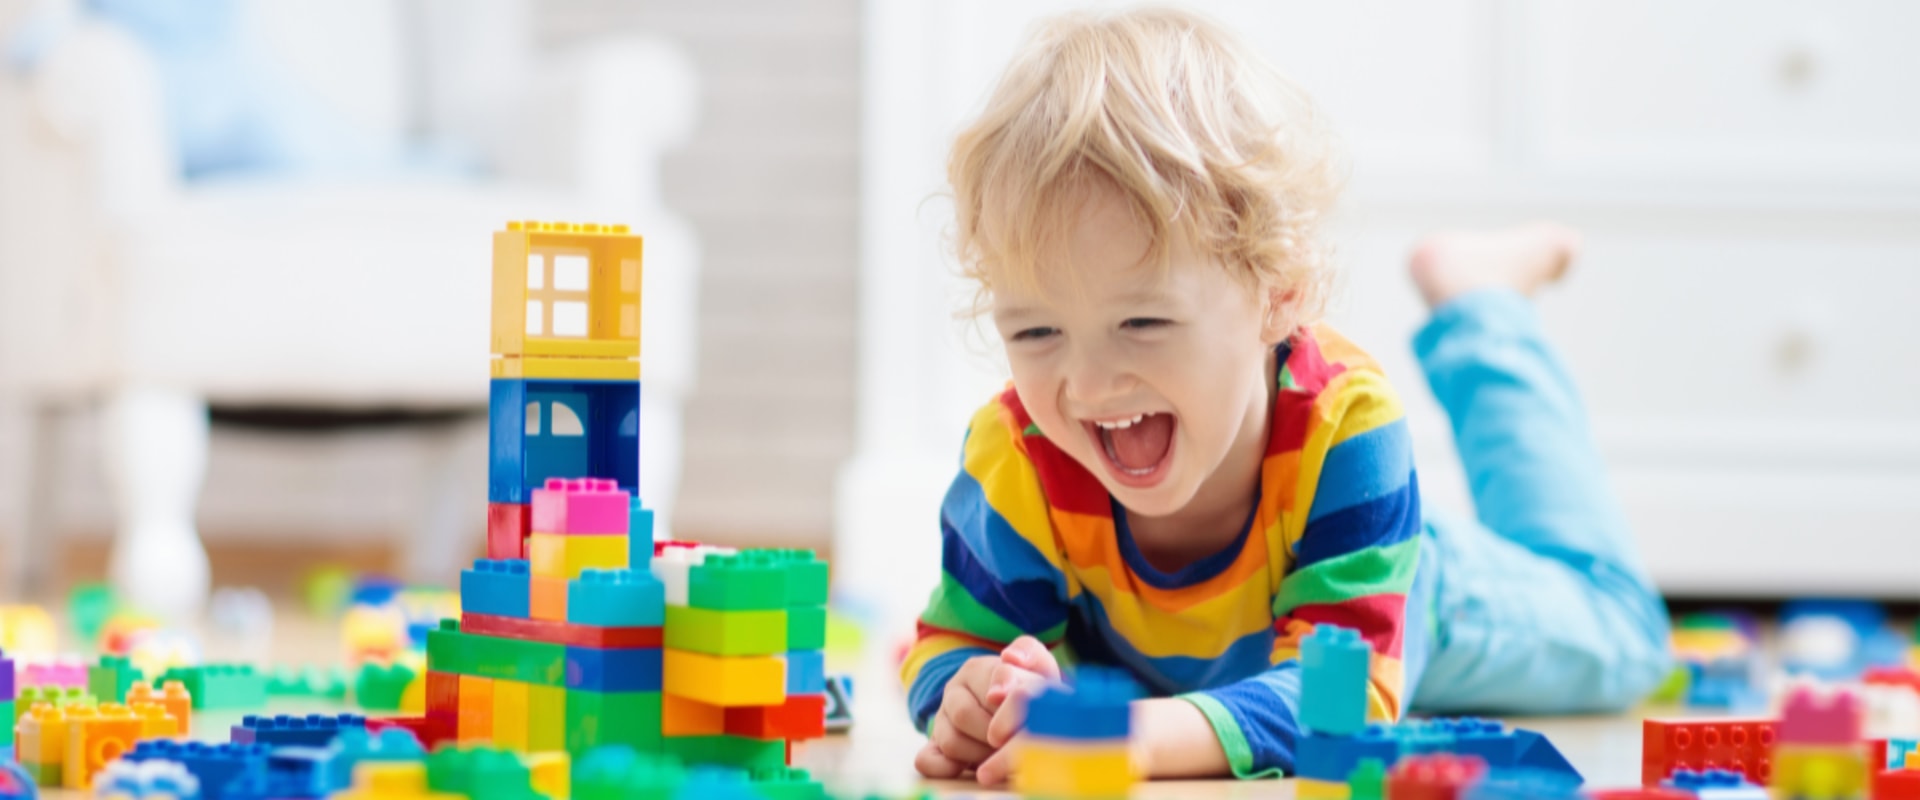 How can you encourage speech and language development?